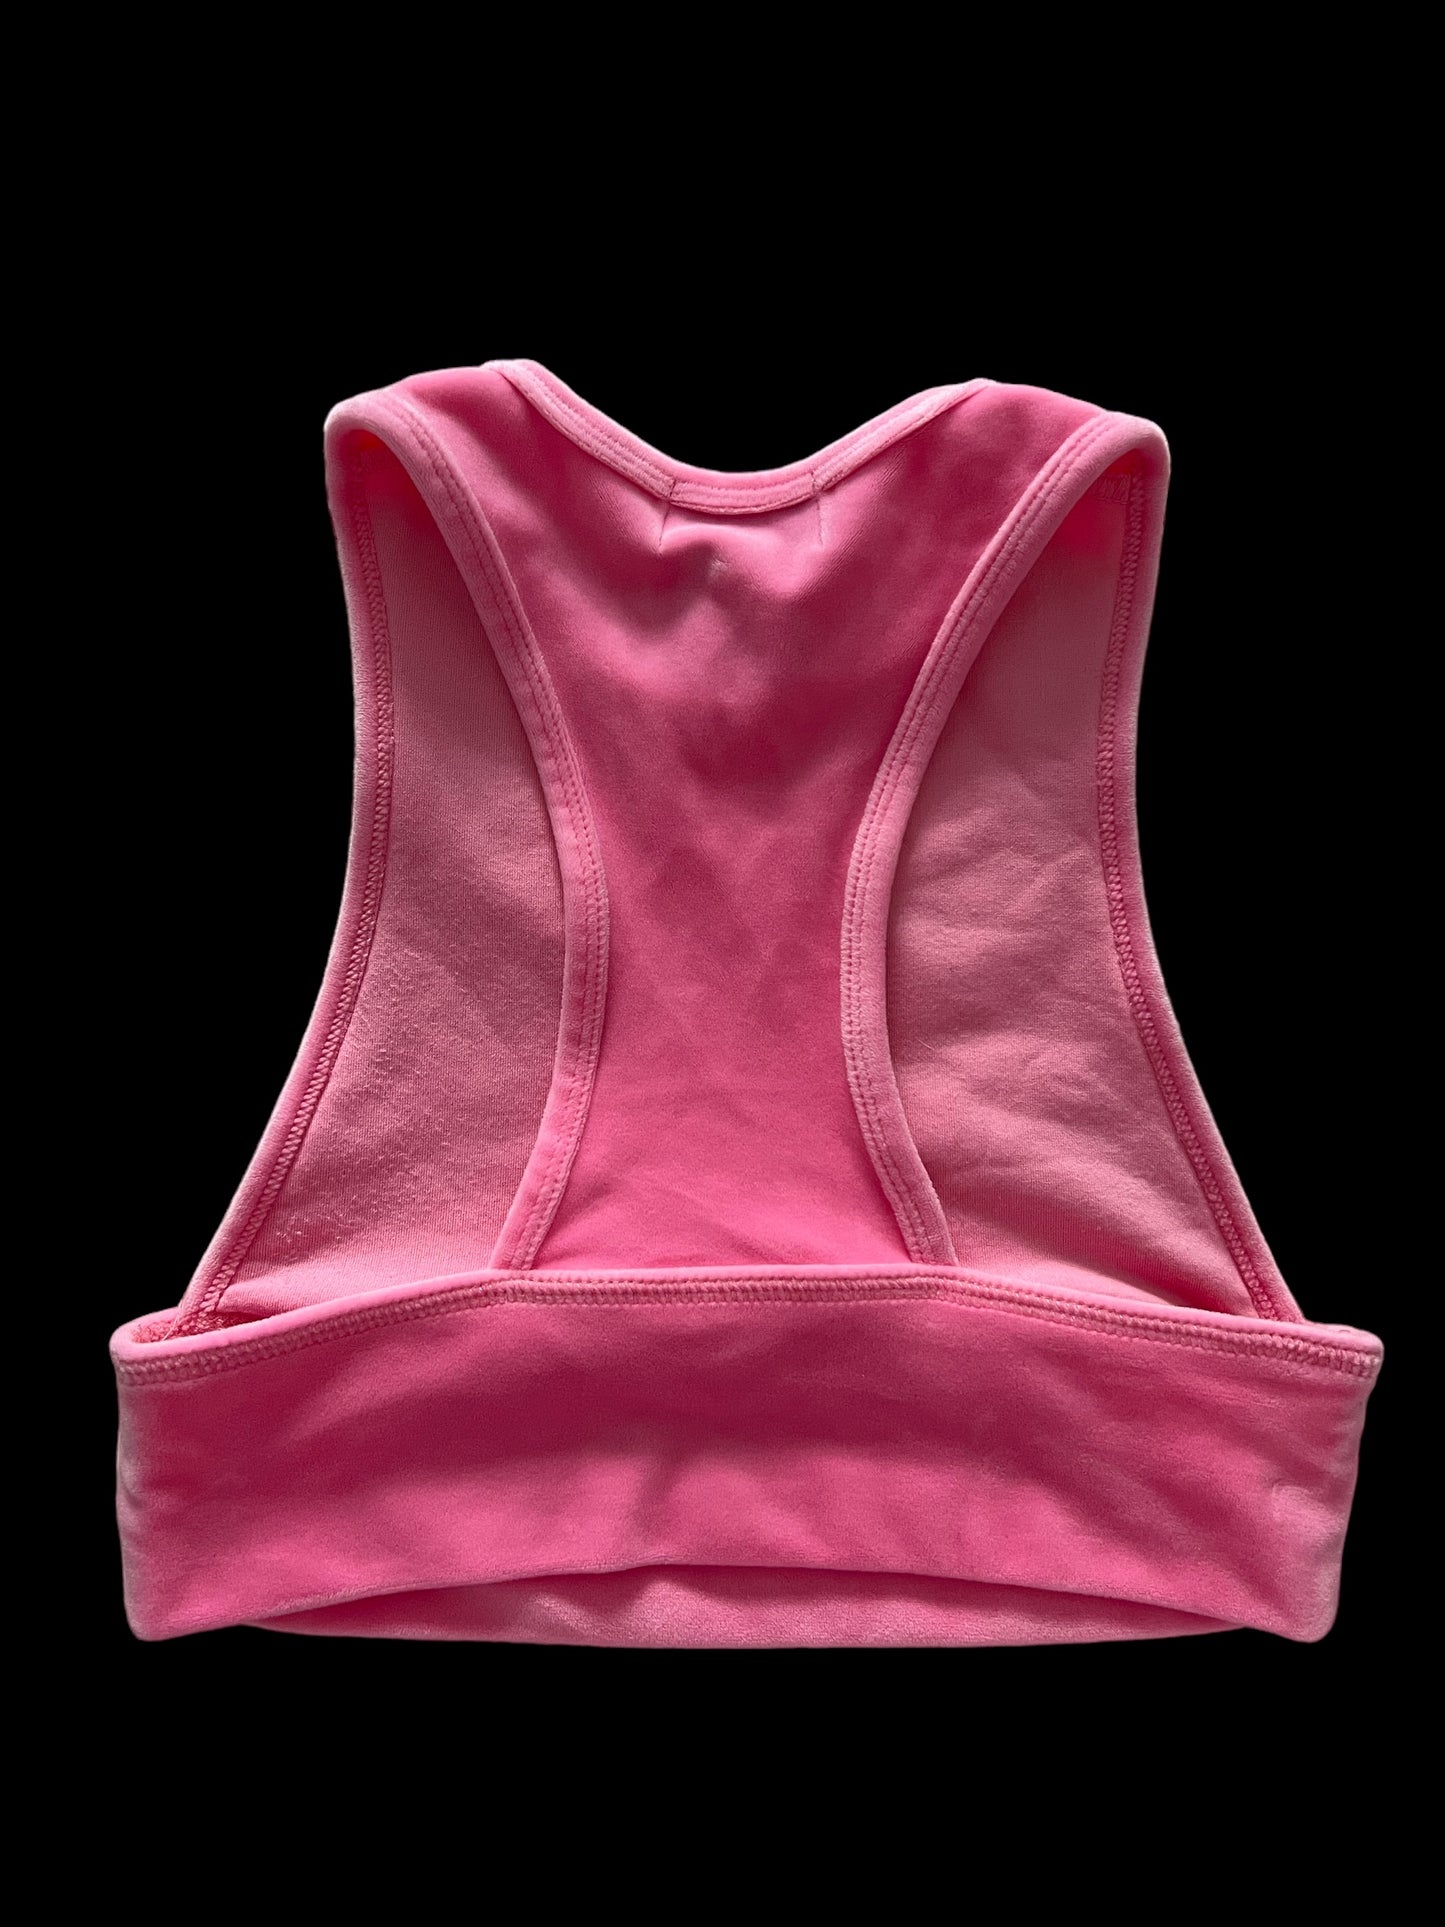 Juicy Couture sleeveless top